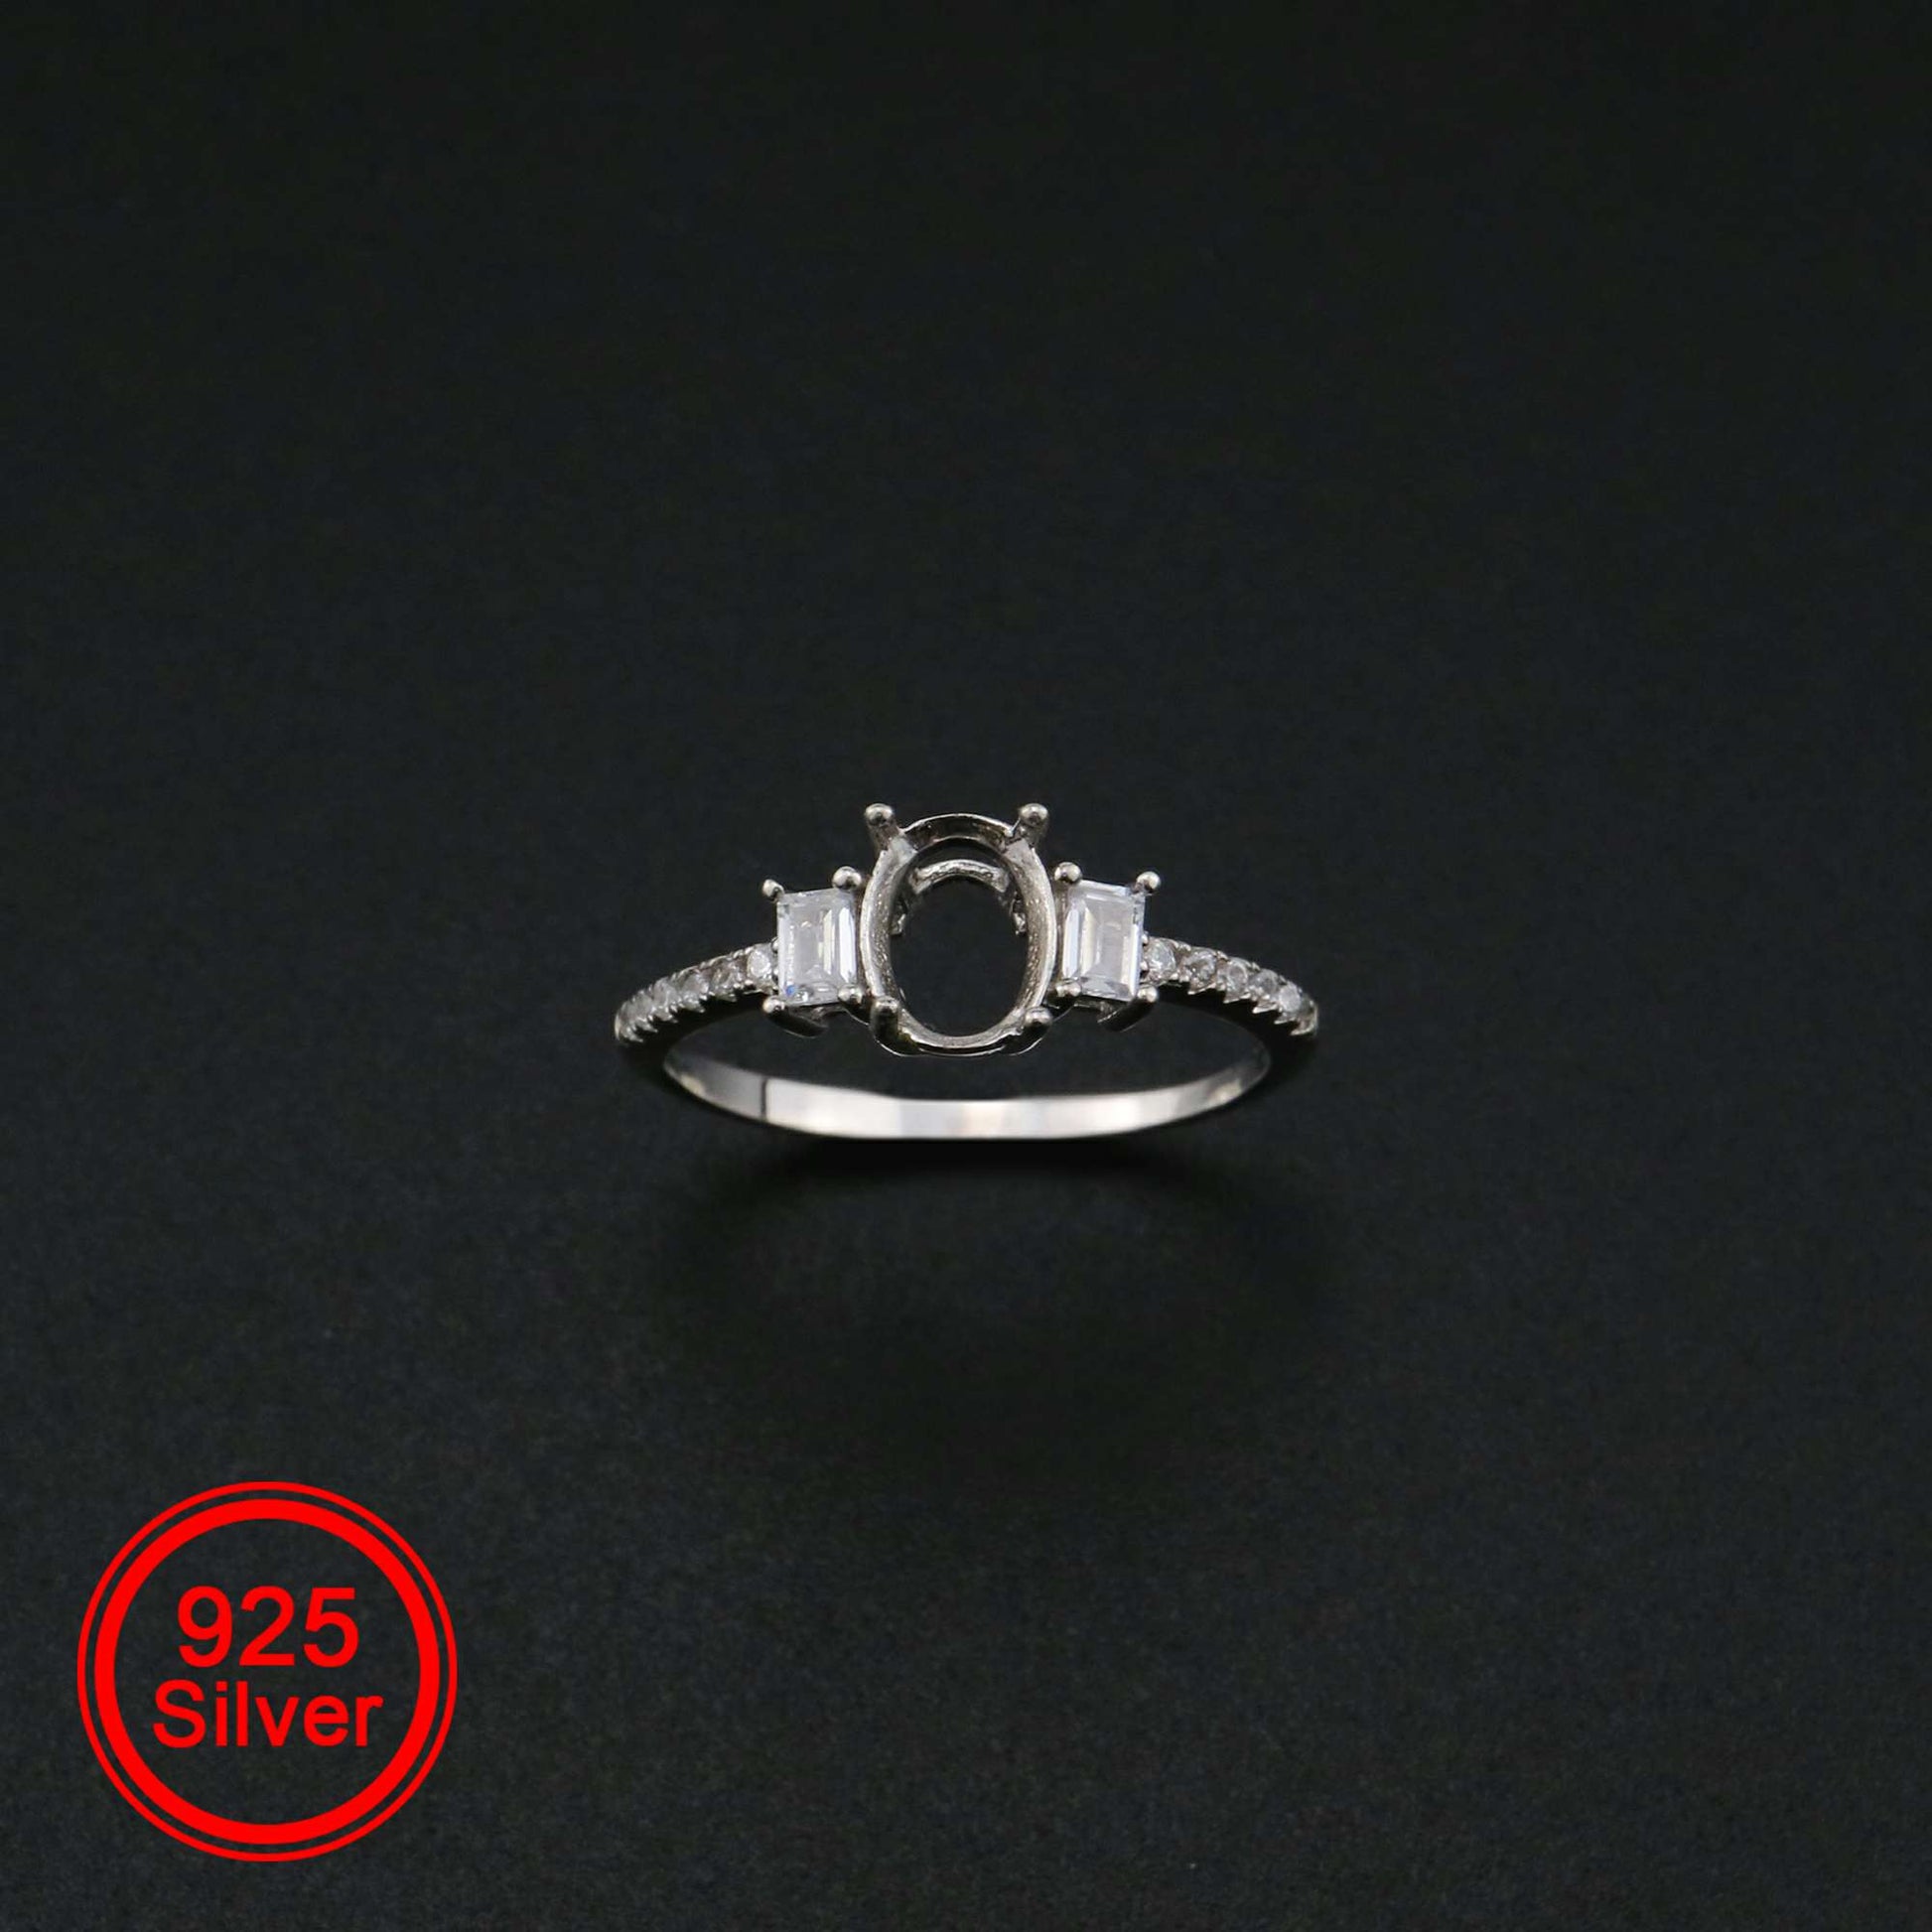 A silver oval shaped 3 stone semi mount with emerald cut gems on the sides.